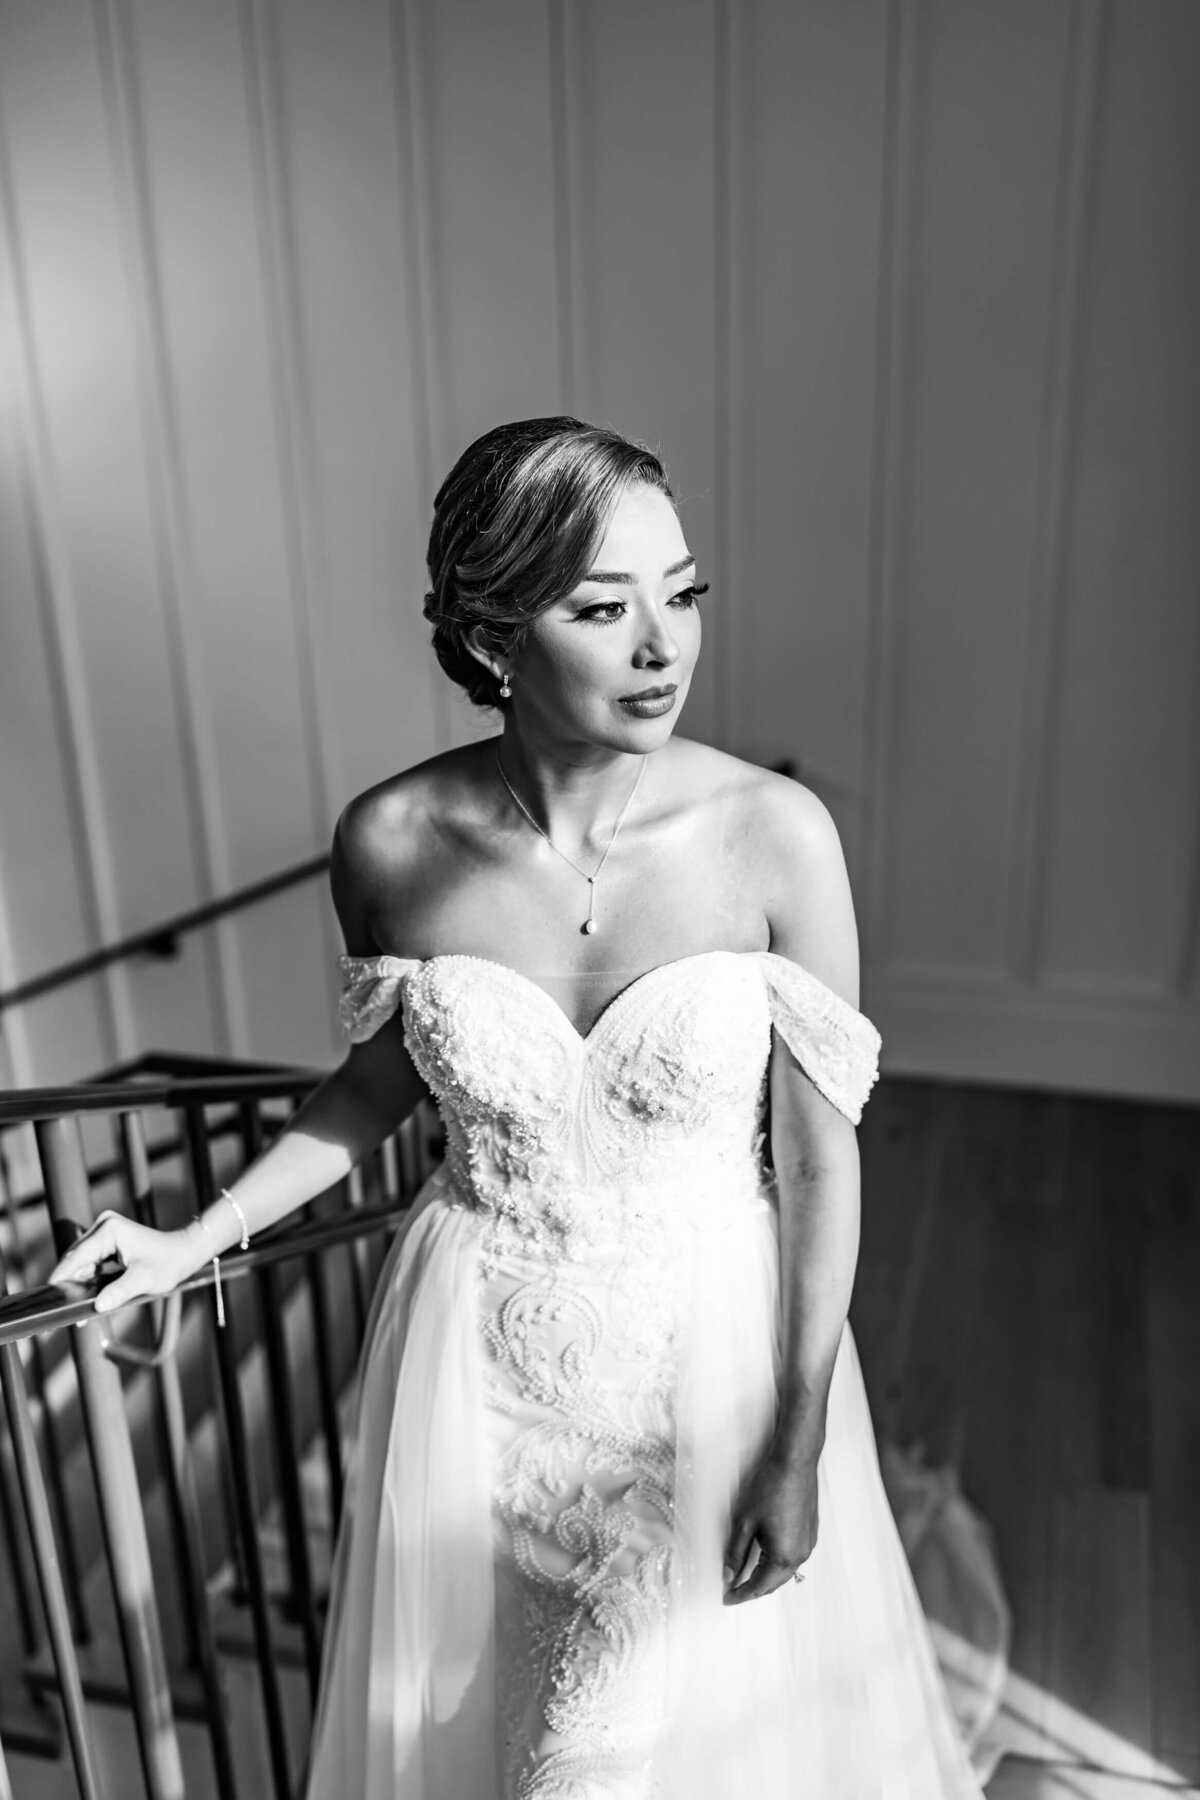 black and white image of a bride standing in on staircase, in front of large window